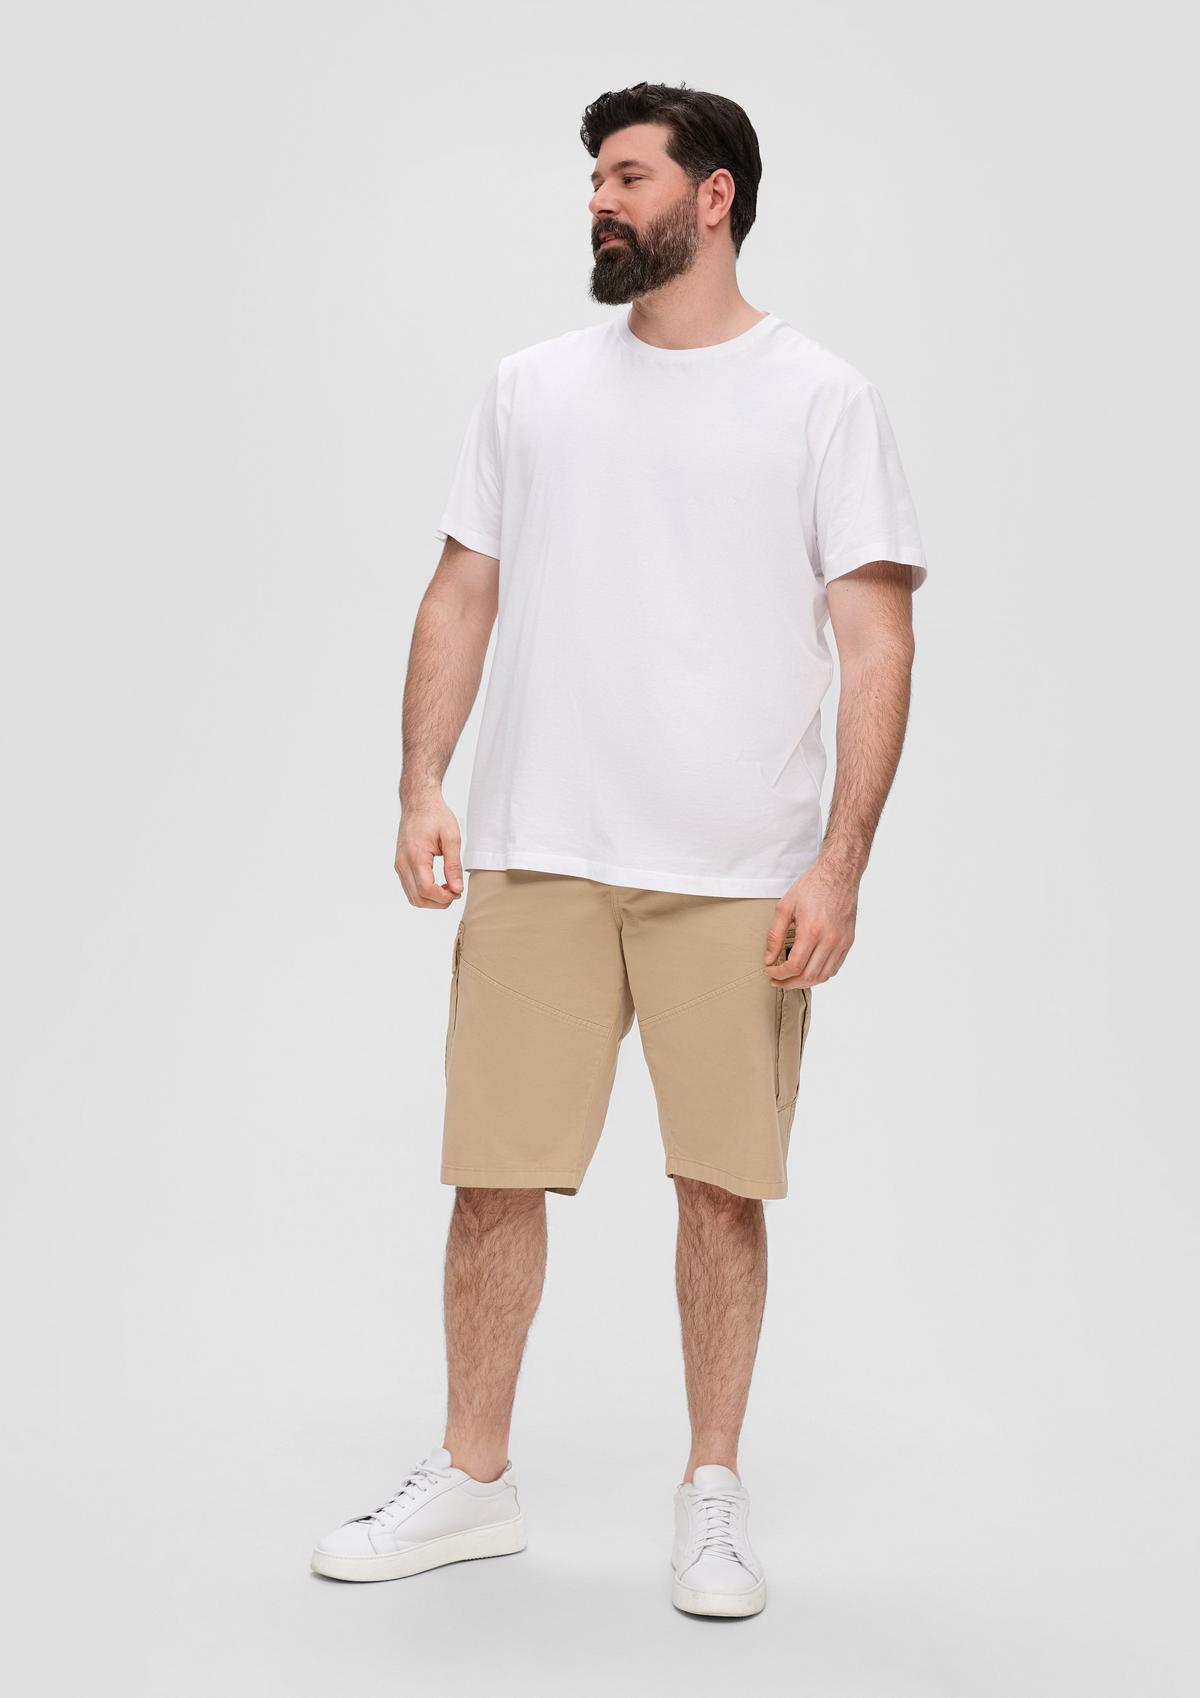 Relaxed fit: garment-dyed cargo Bermudas